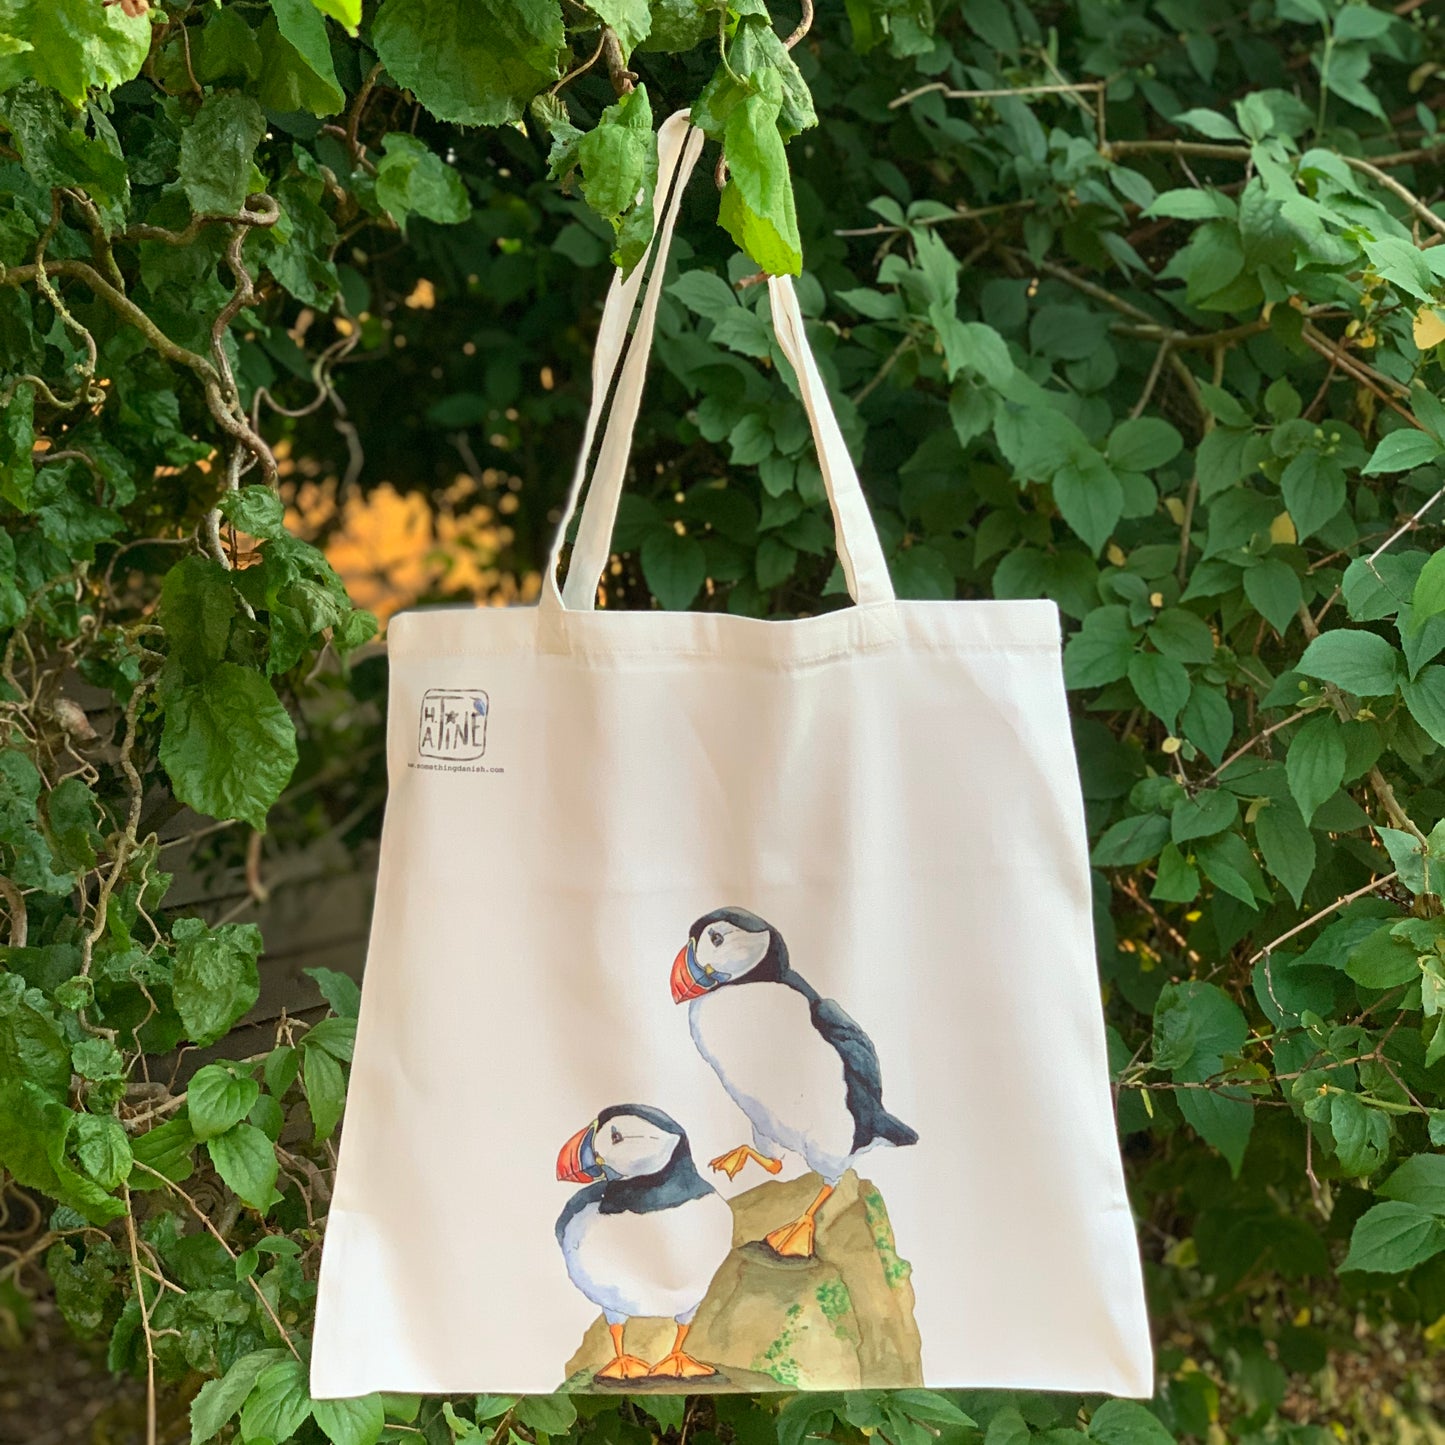 Søpapegøje net // Puffin Tote